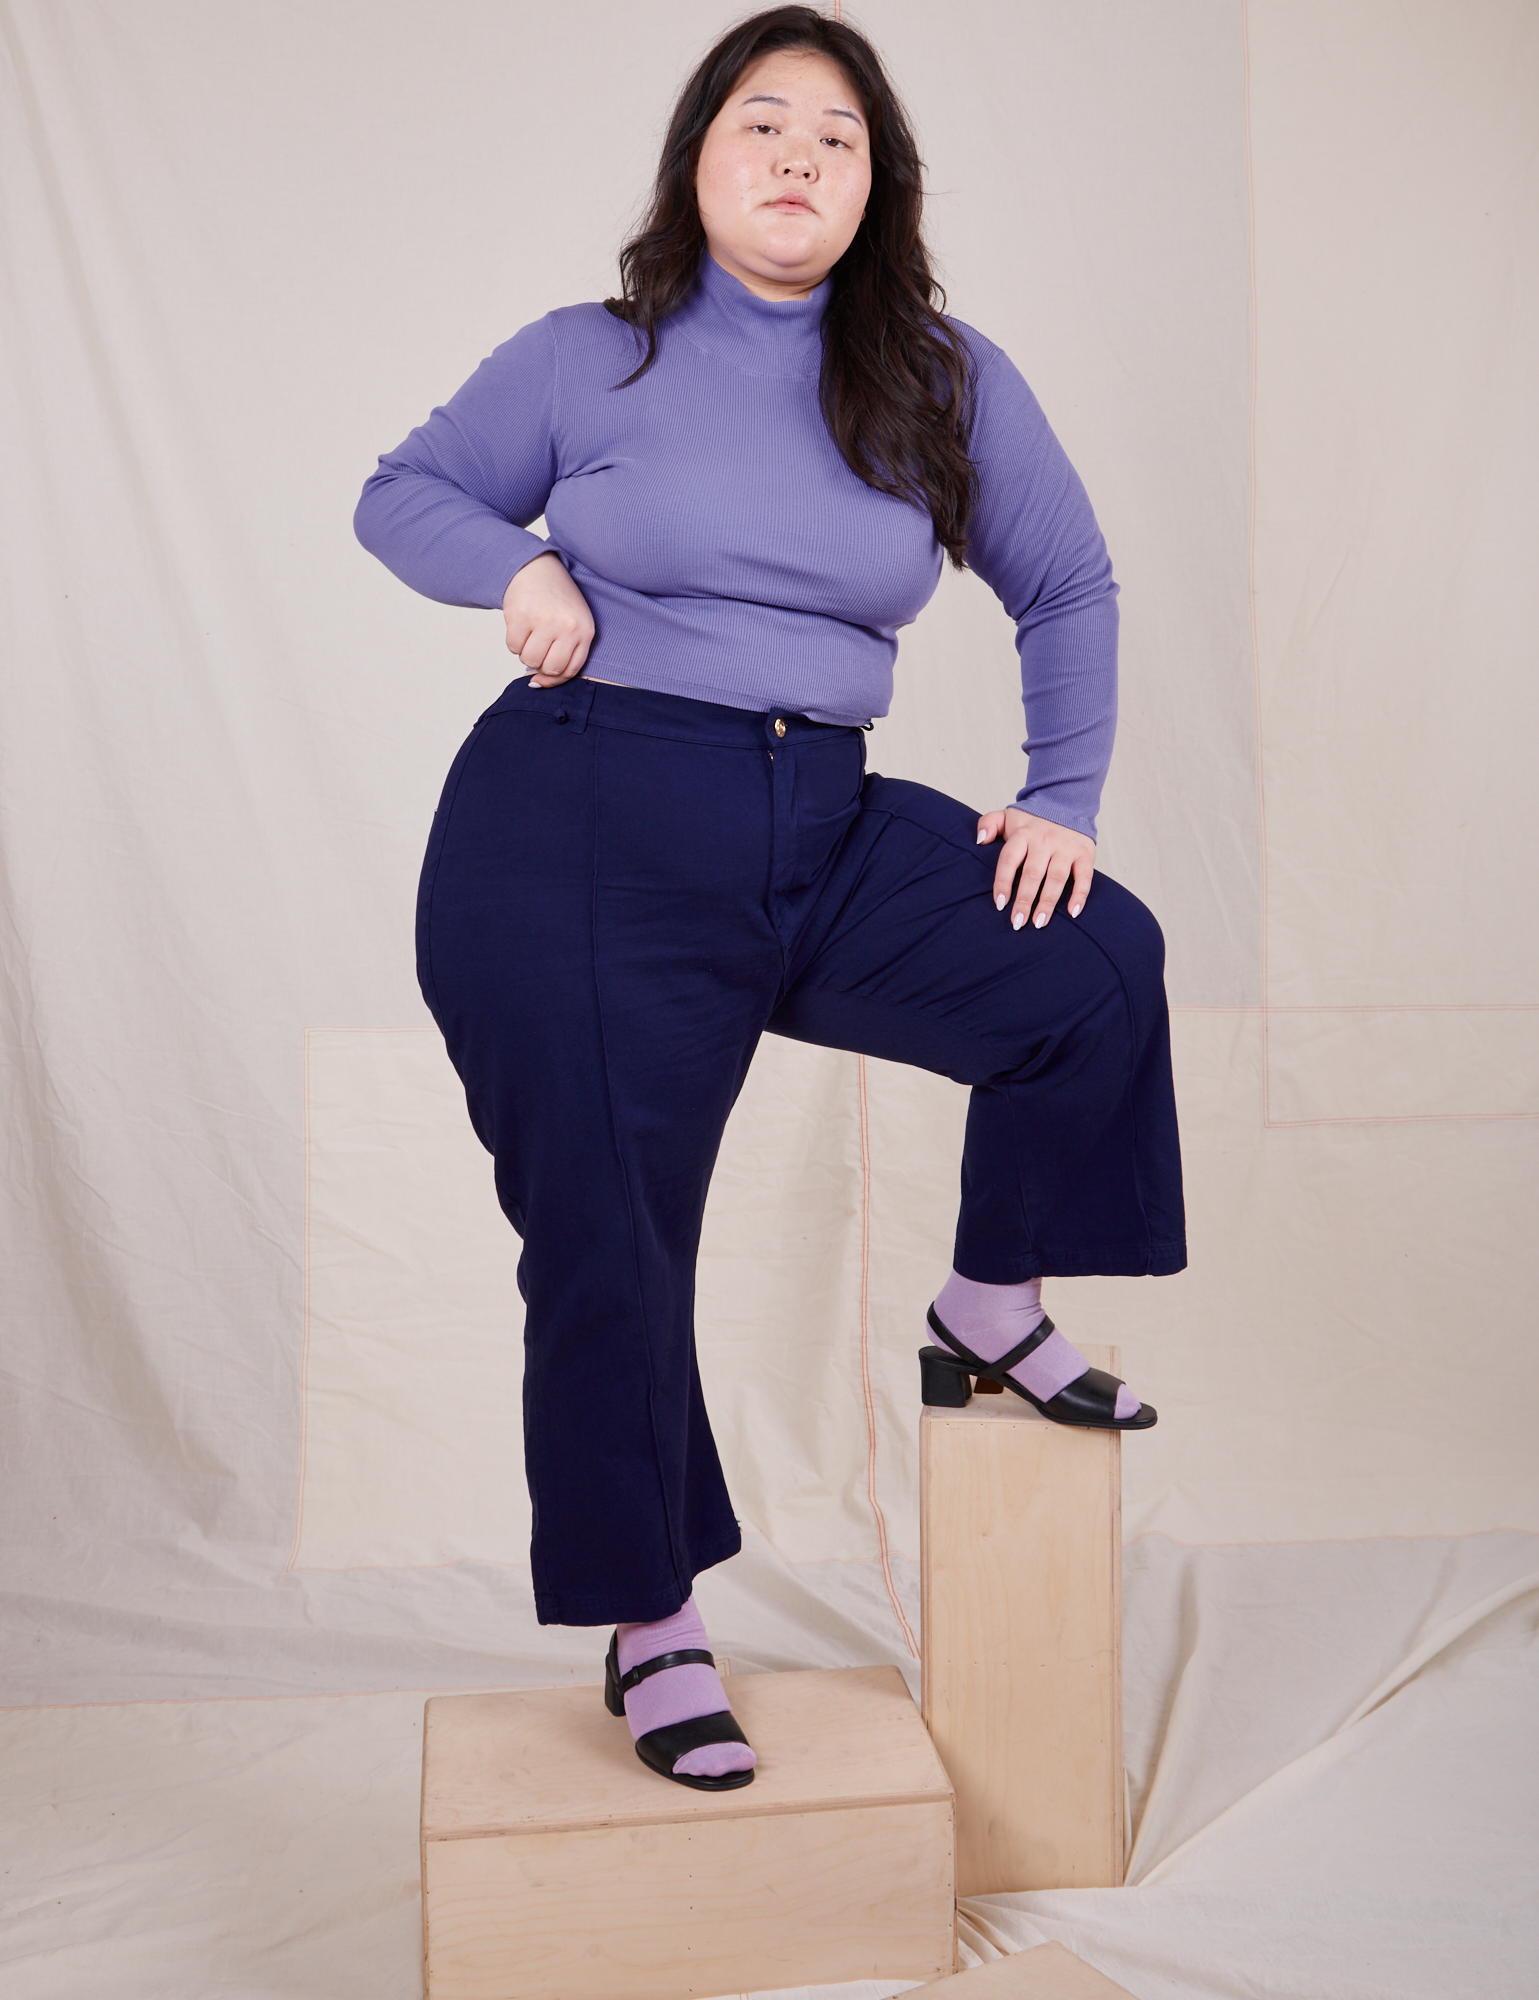 Ashley is wearing Essential Turtleneck in Faded Grape and navy Western Pants